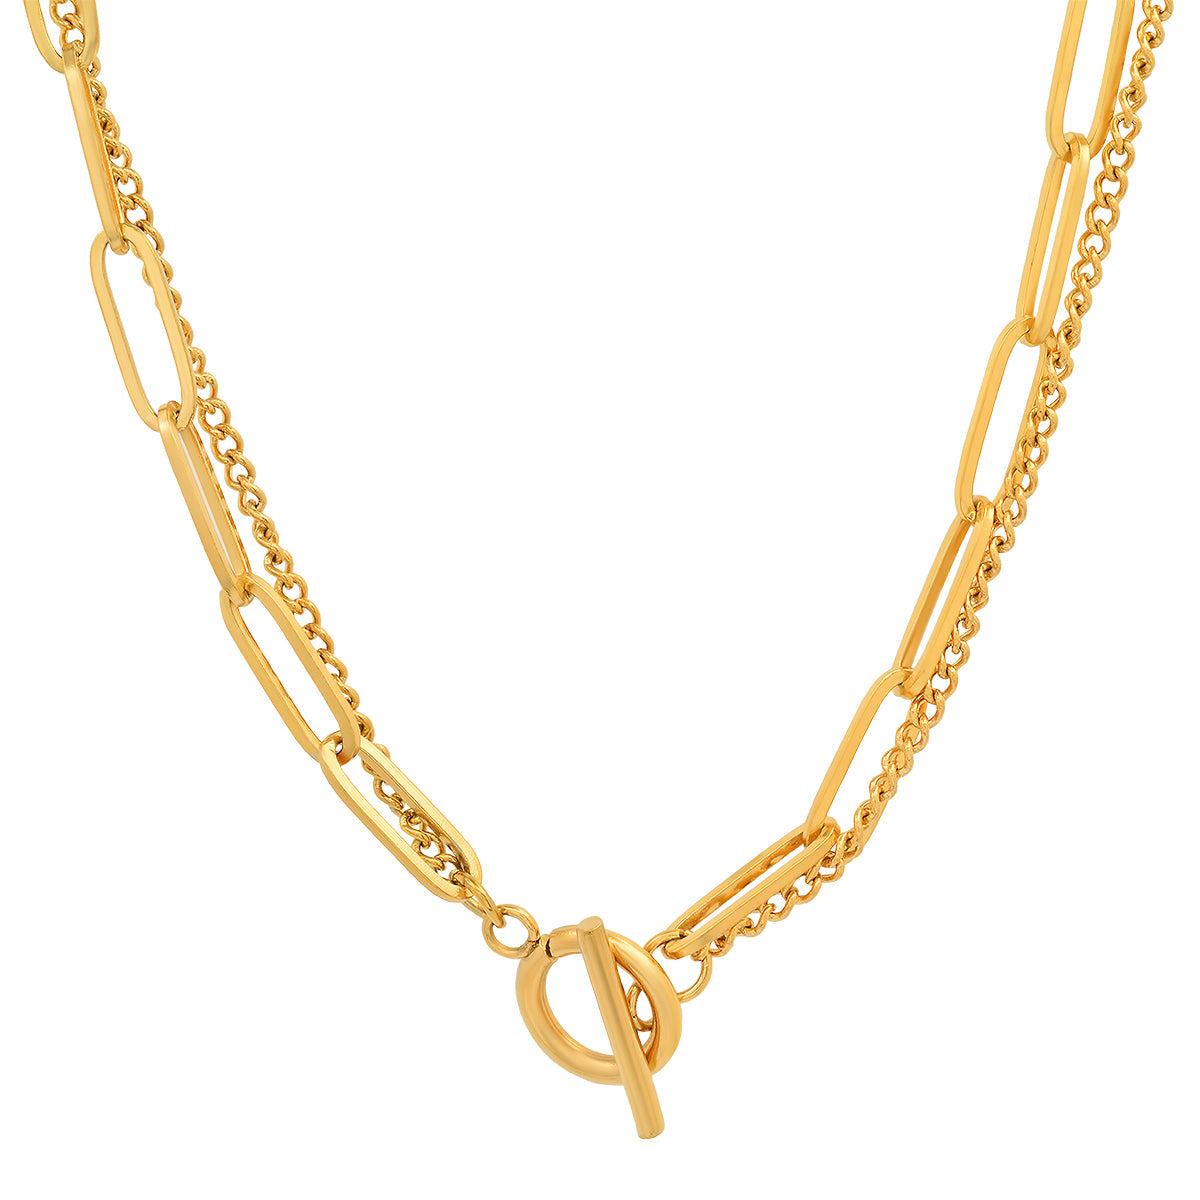 Lock and Key Lariat Necklace in 10K Gold